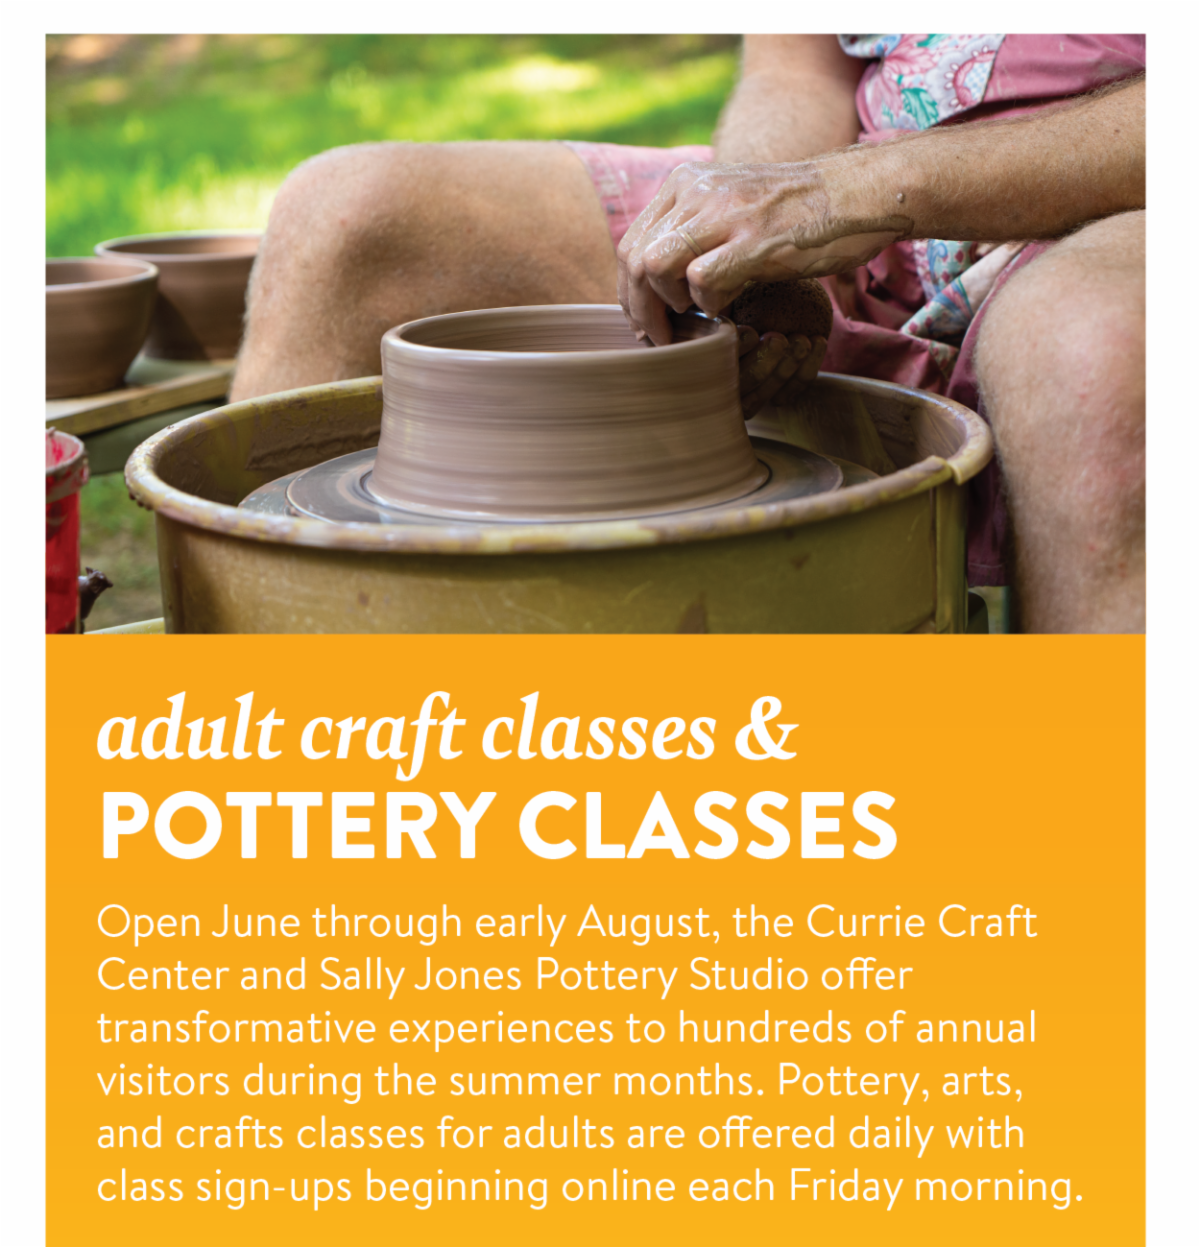 Adult craft classes & pottery classes - Open June through early August, the Currie Craft Center and Sally Jones Pottery Studio offer transformative experiences to hundreds of annual visitors during the summer months. Pottery, arts, and crafts classes for adults are offered daily with class sign-ups beginning online each Friday morning.